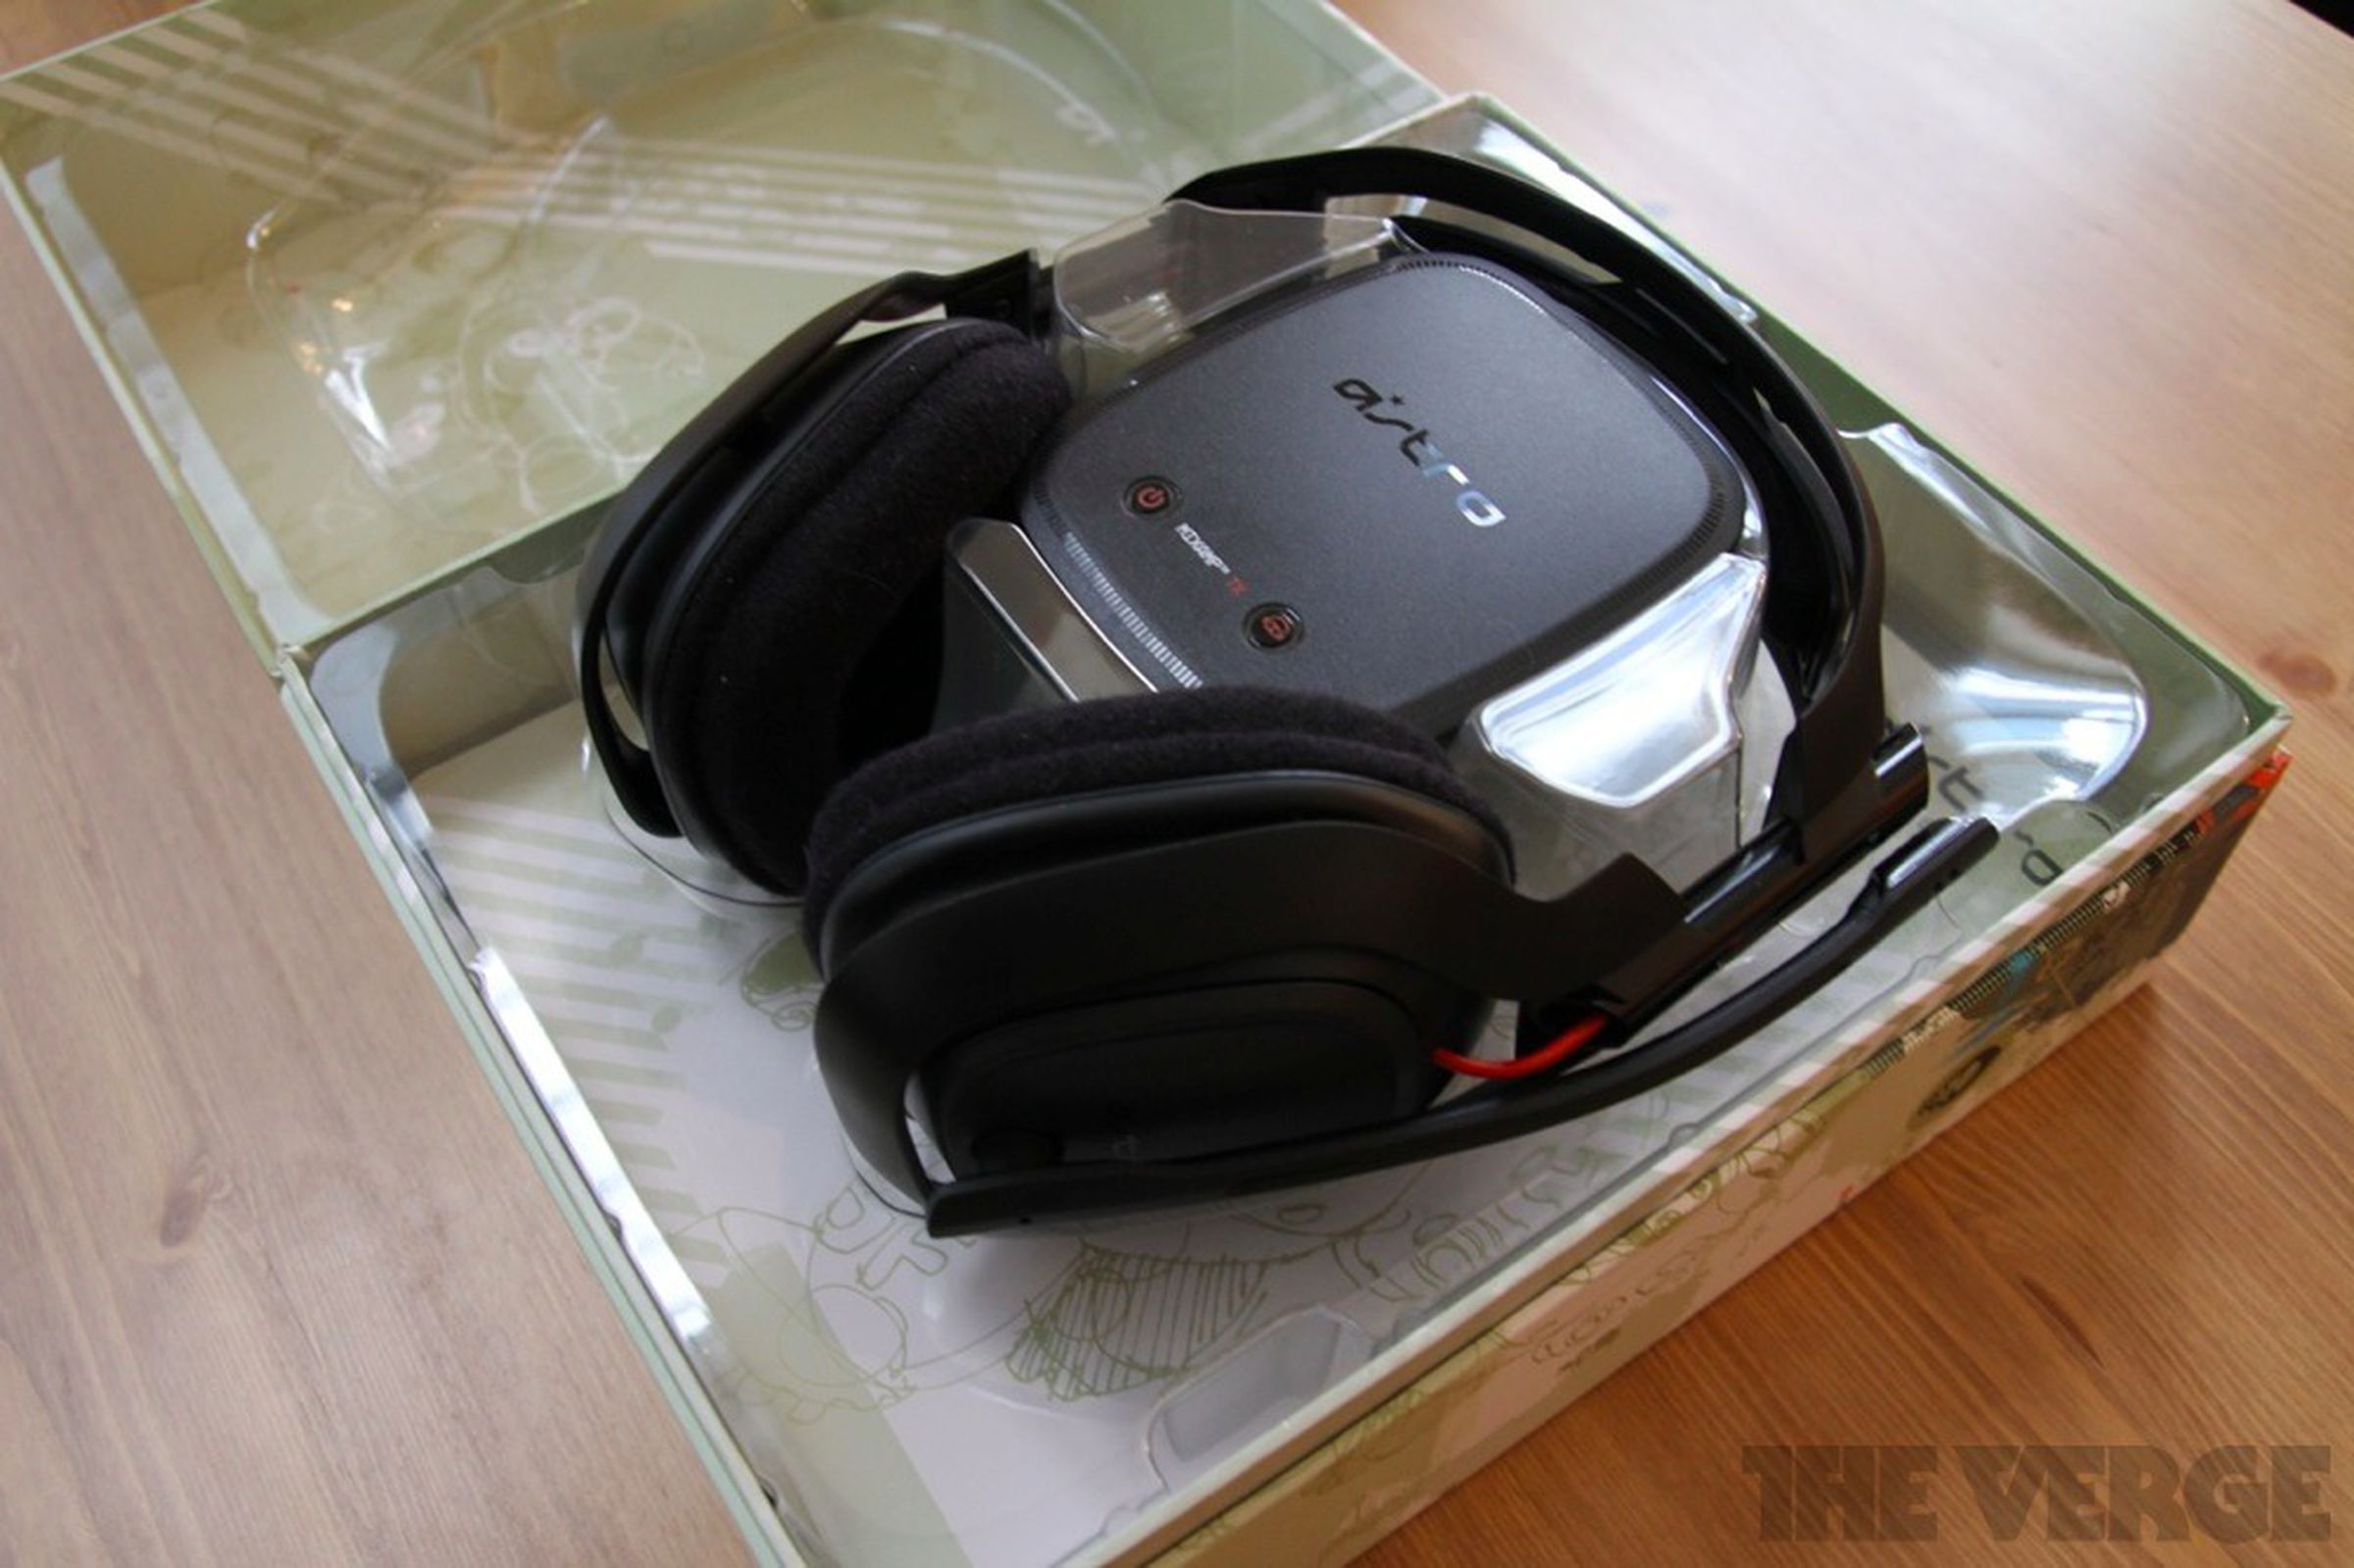 Astro A50 wireless gaming headset photos